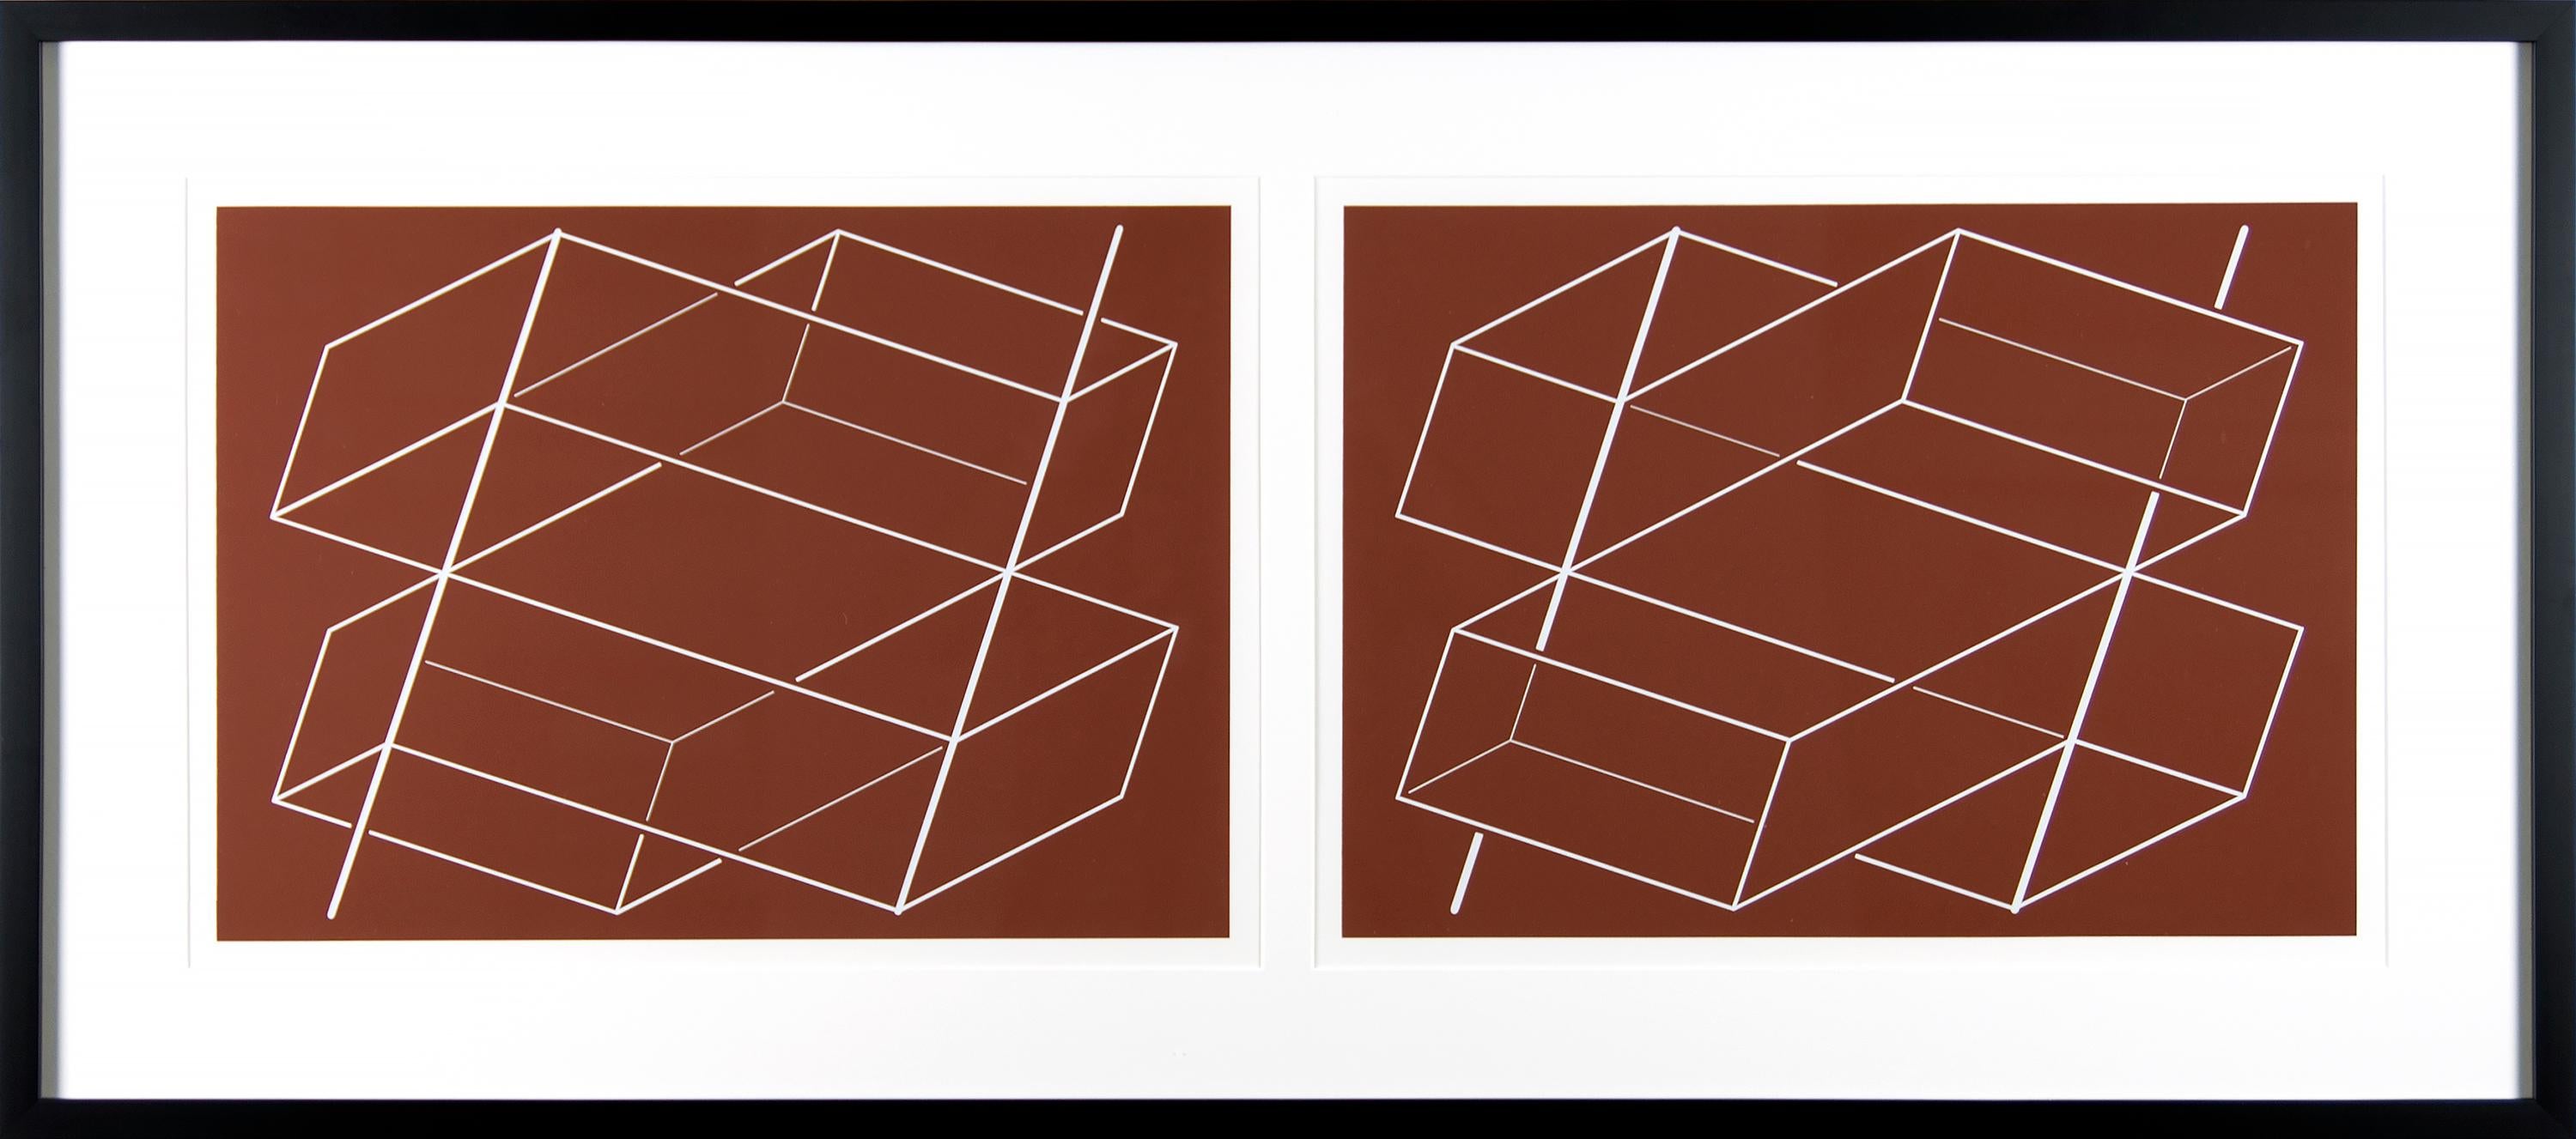 Untitled from Formulation: Articulation - Print by Josef Albers